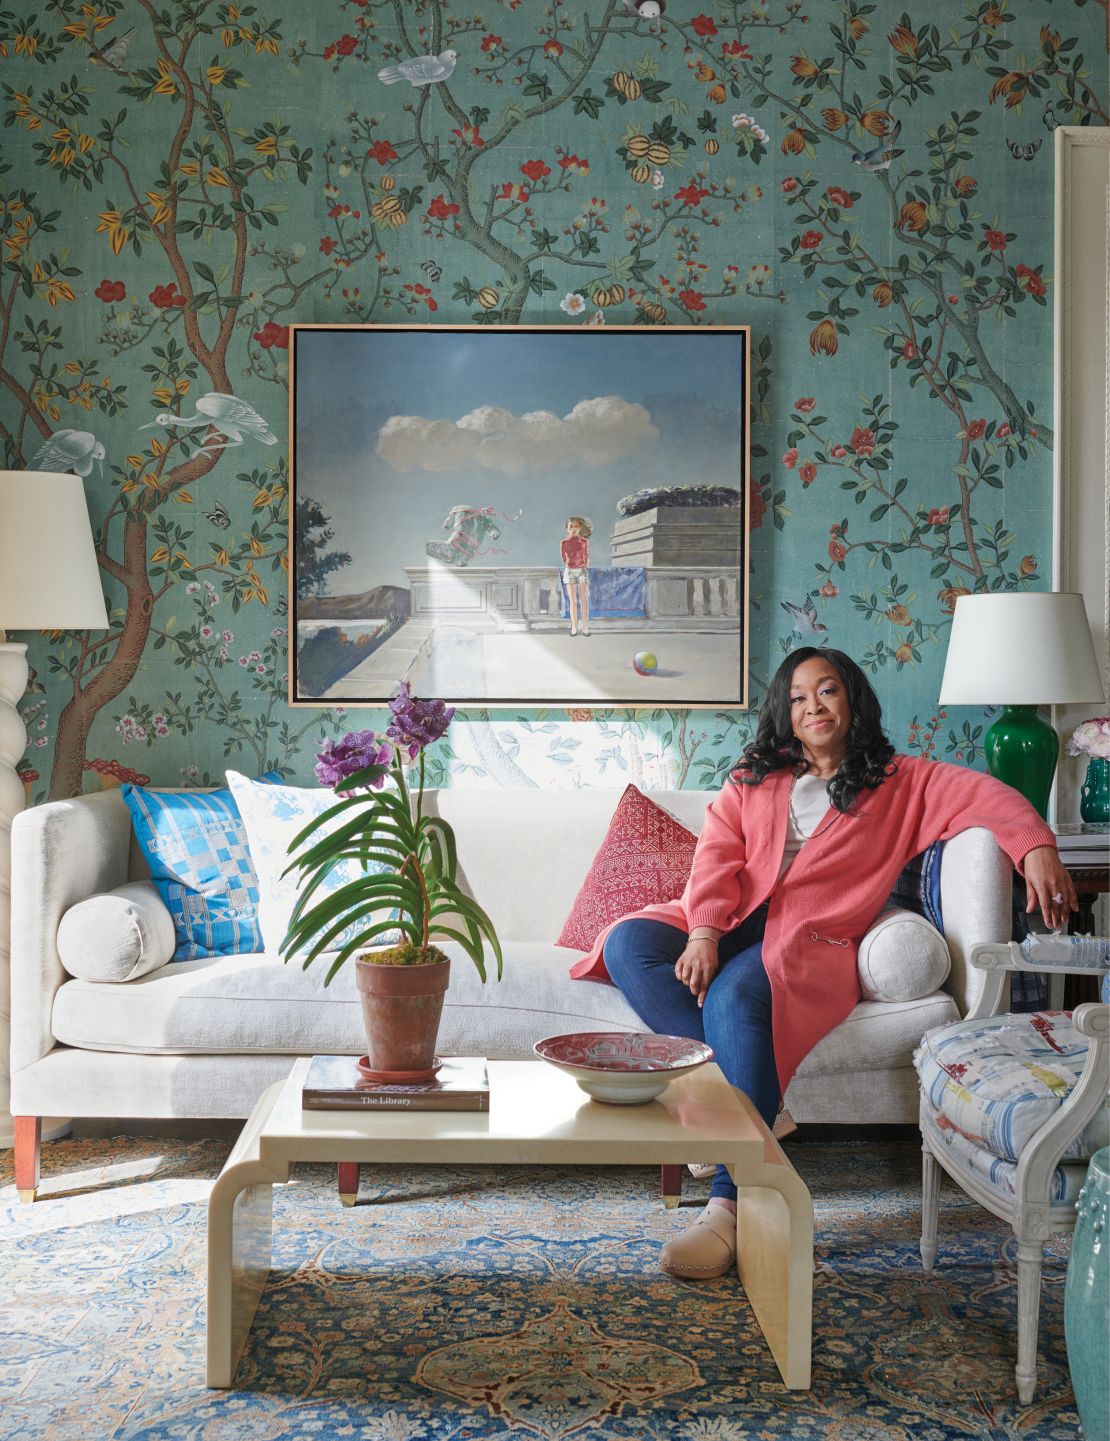 Shonda Rhimes' regal New York City outpost was decorated by interior designer Michael S. Smith.